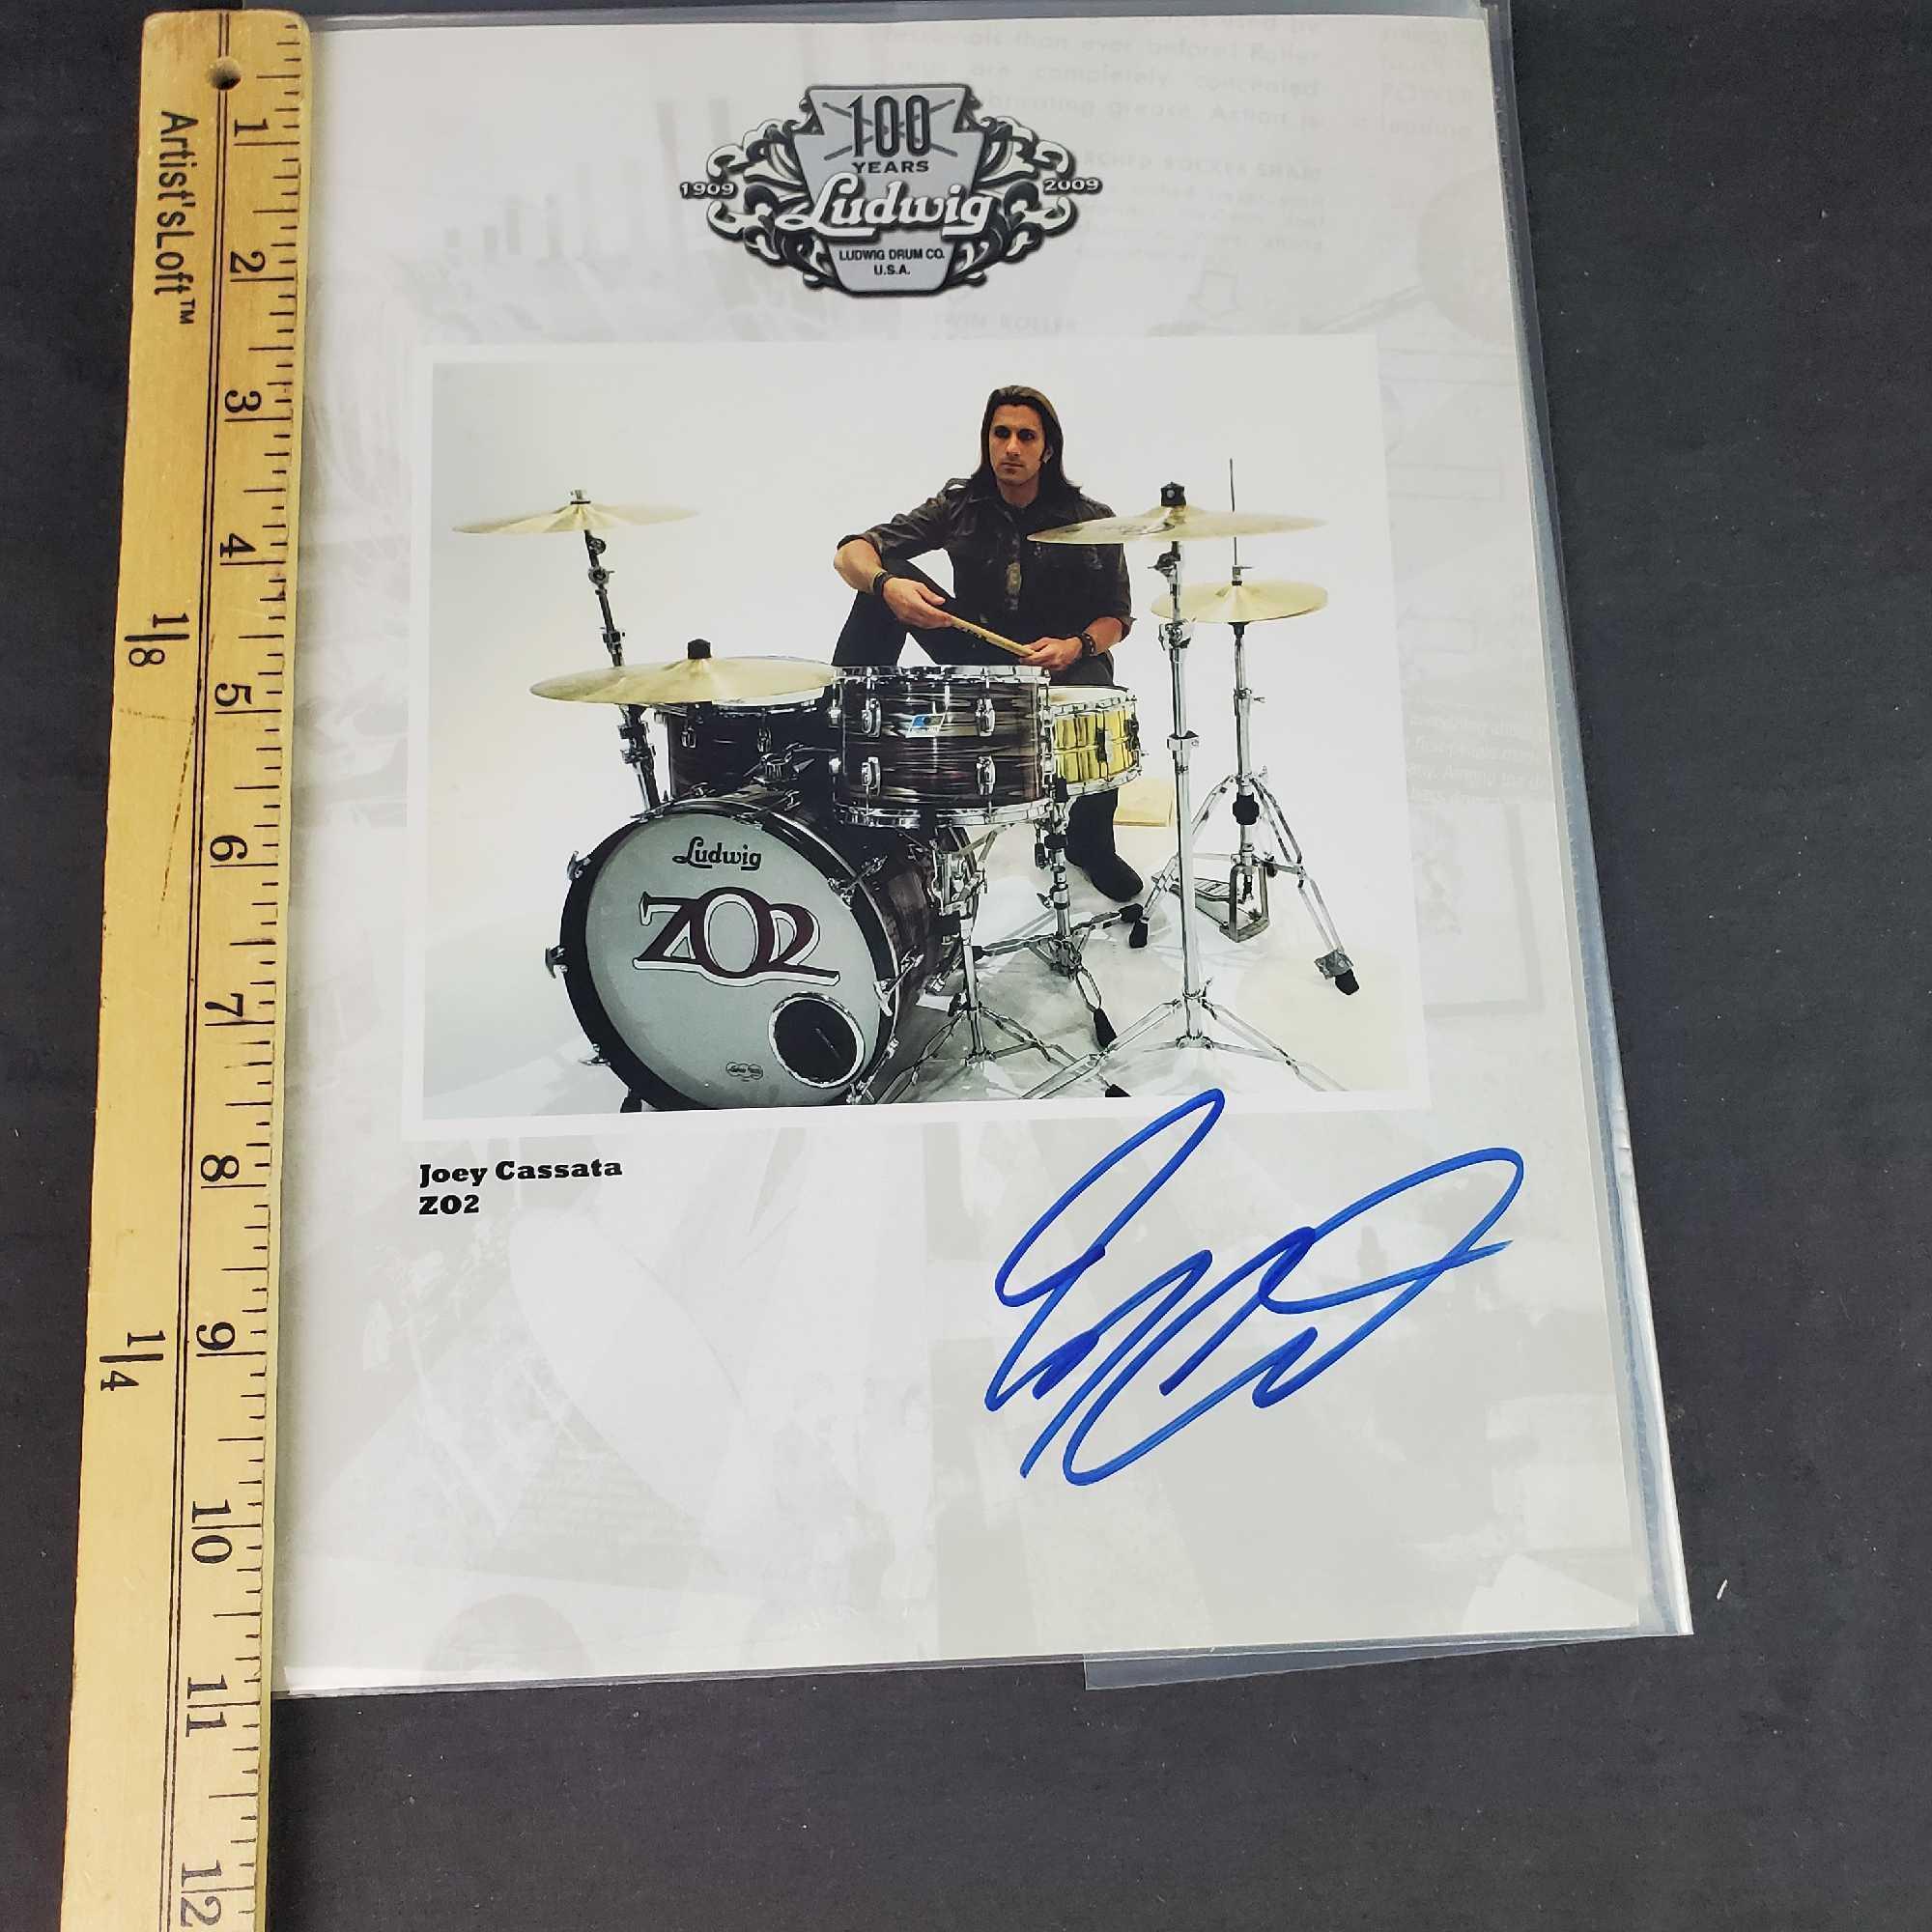 4 photos W/signatures of band drummers Joey Cassata John Fred Young Bobby Rondinelle Anthony